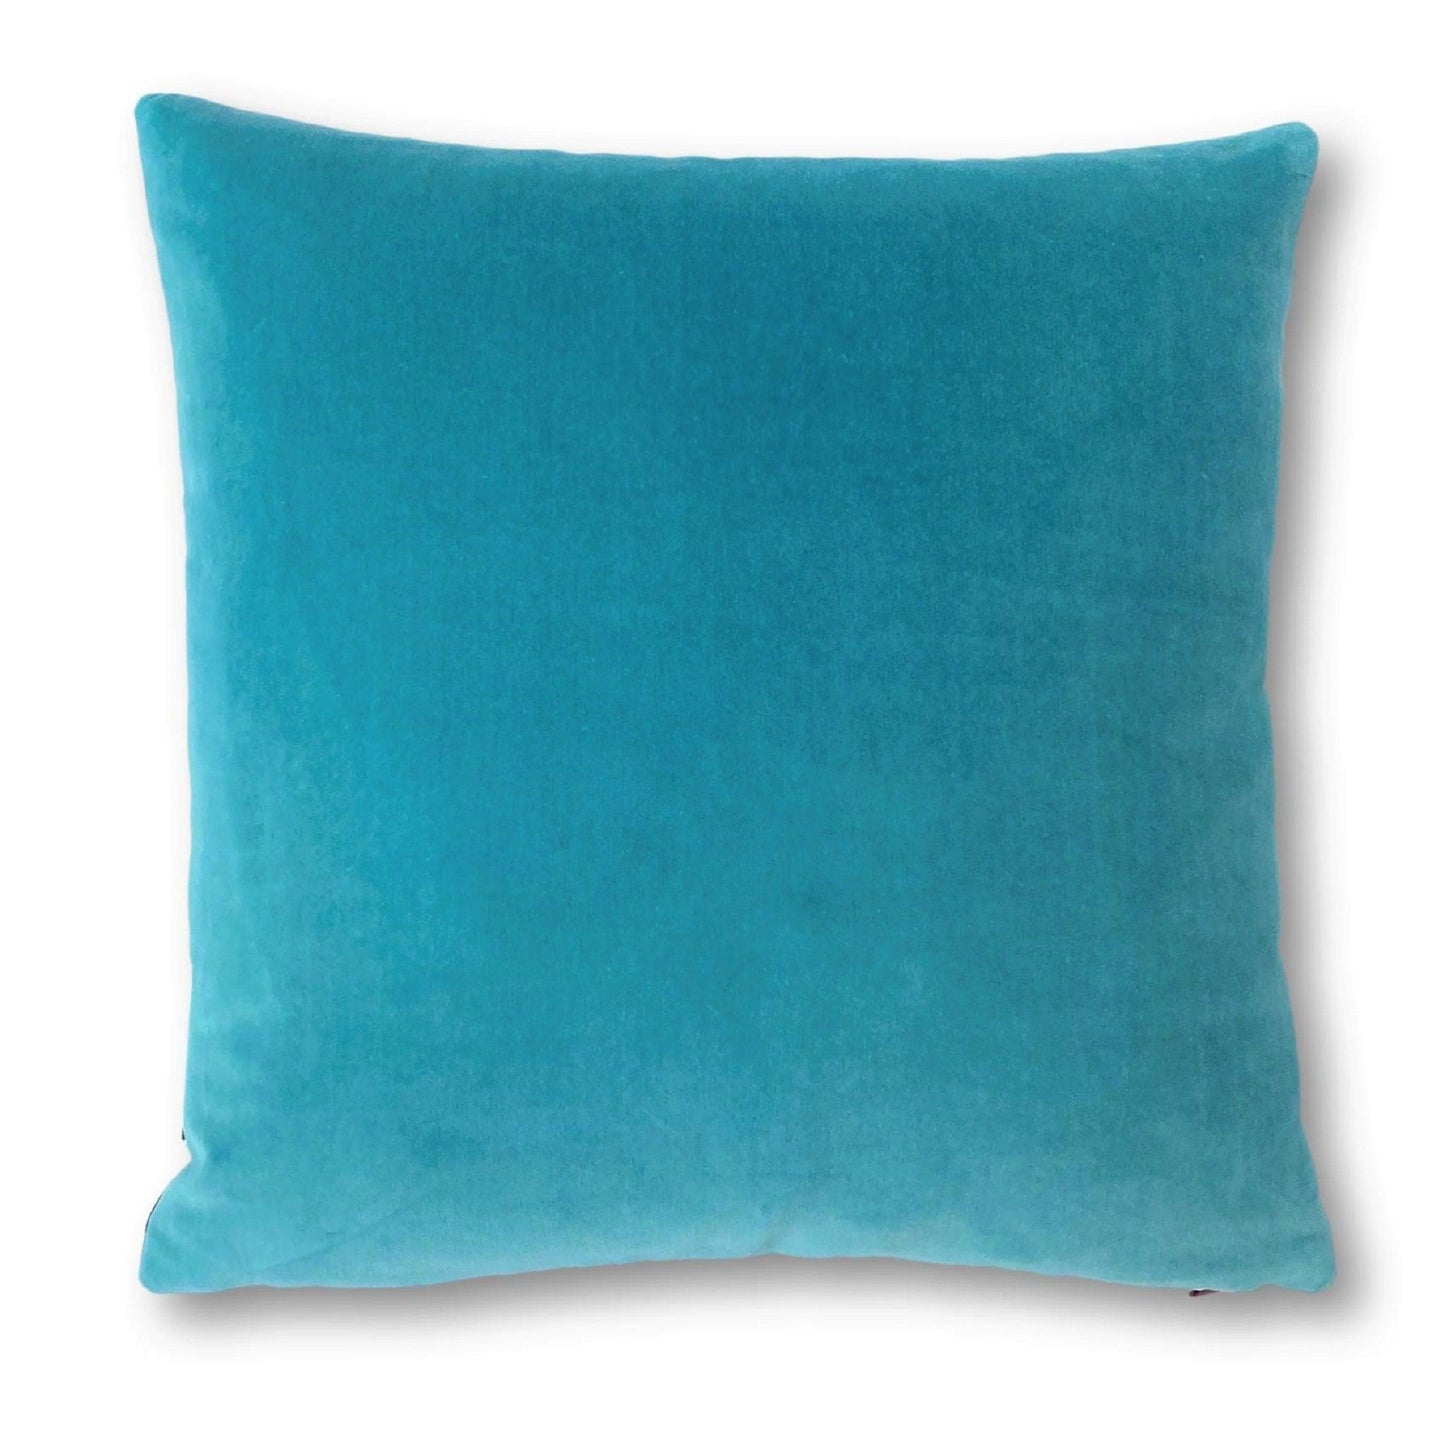 grey and blue cushion luxe 39